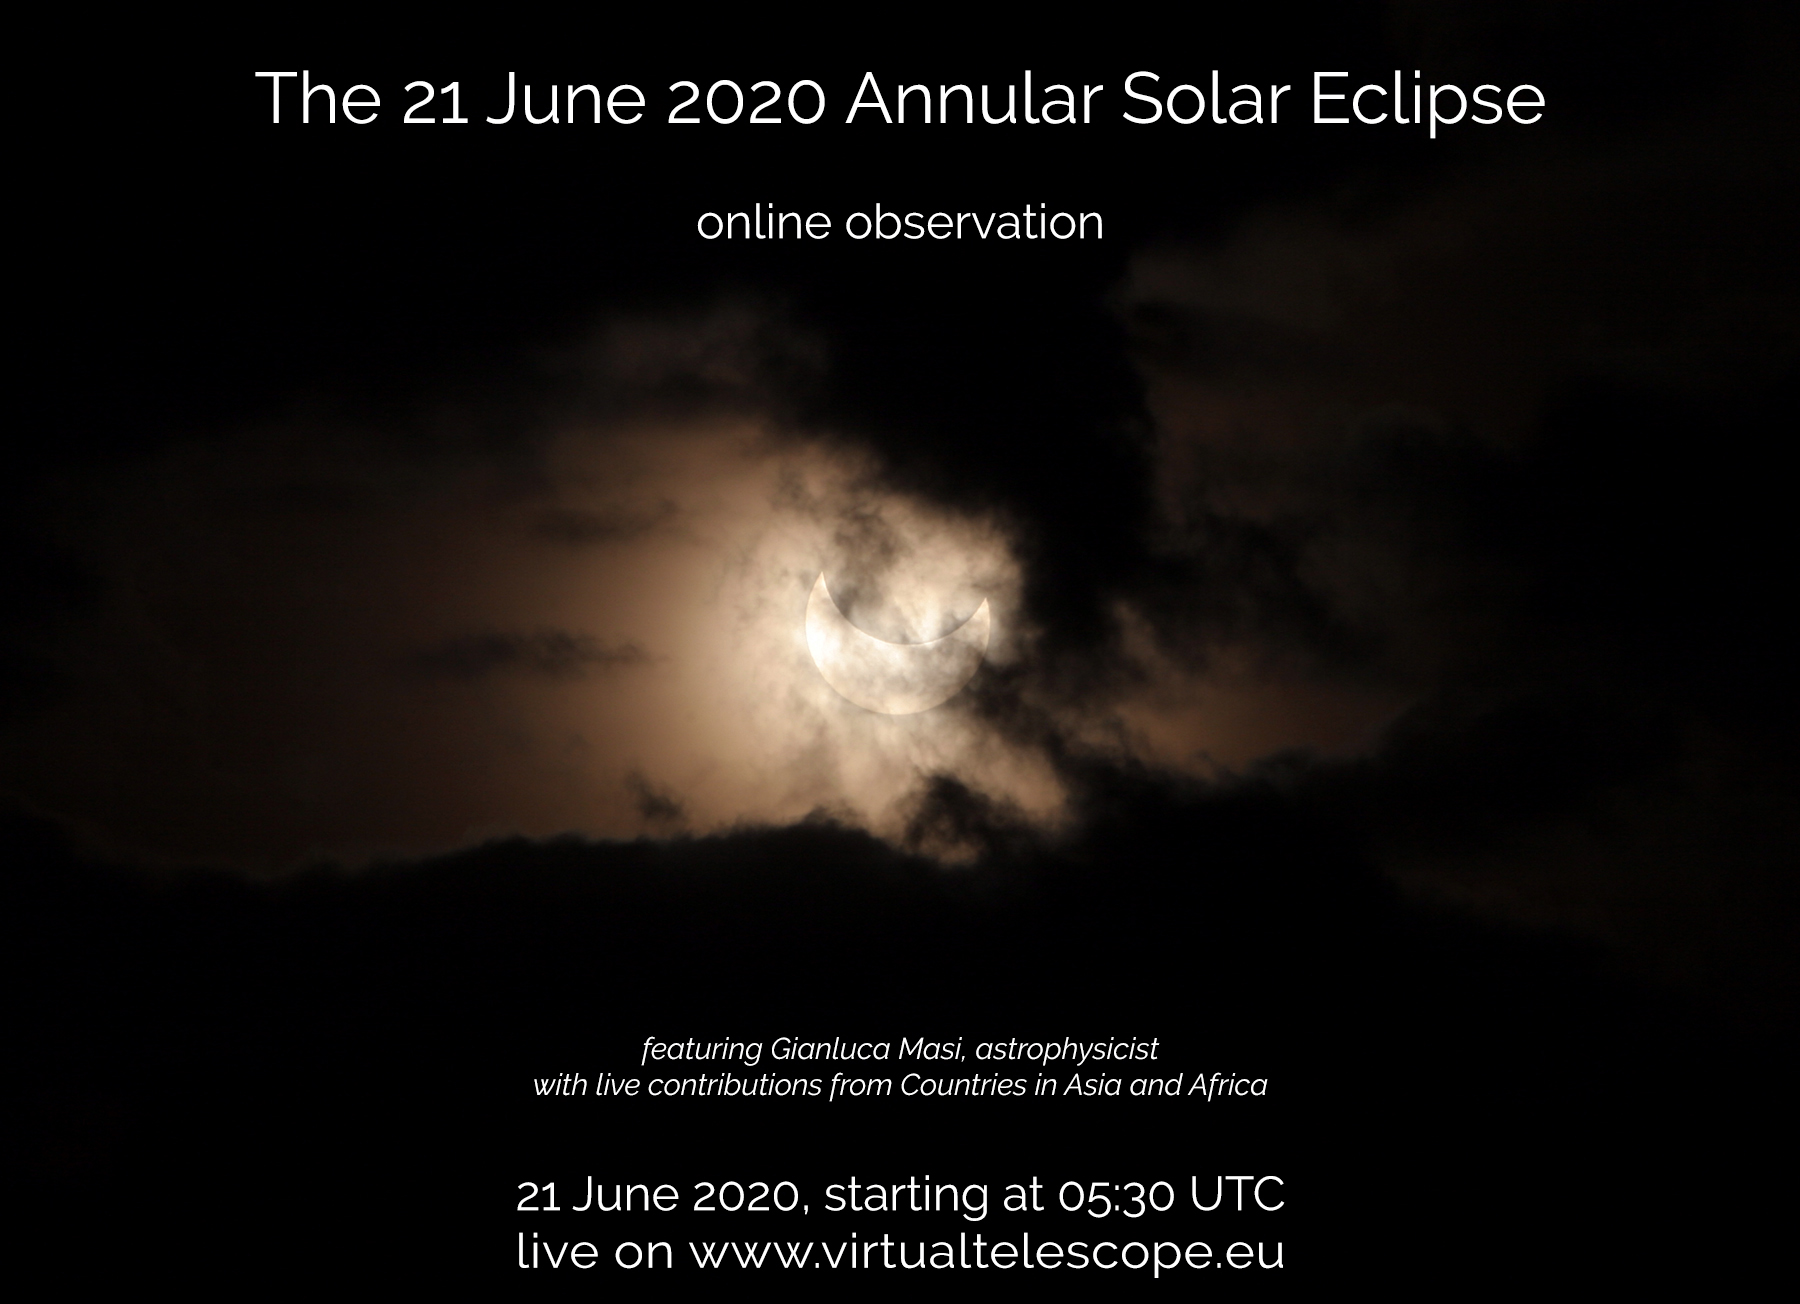 "21 June 2020 Solstice Annular Solar Eclipse" - poster of the event